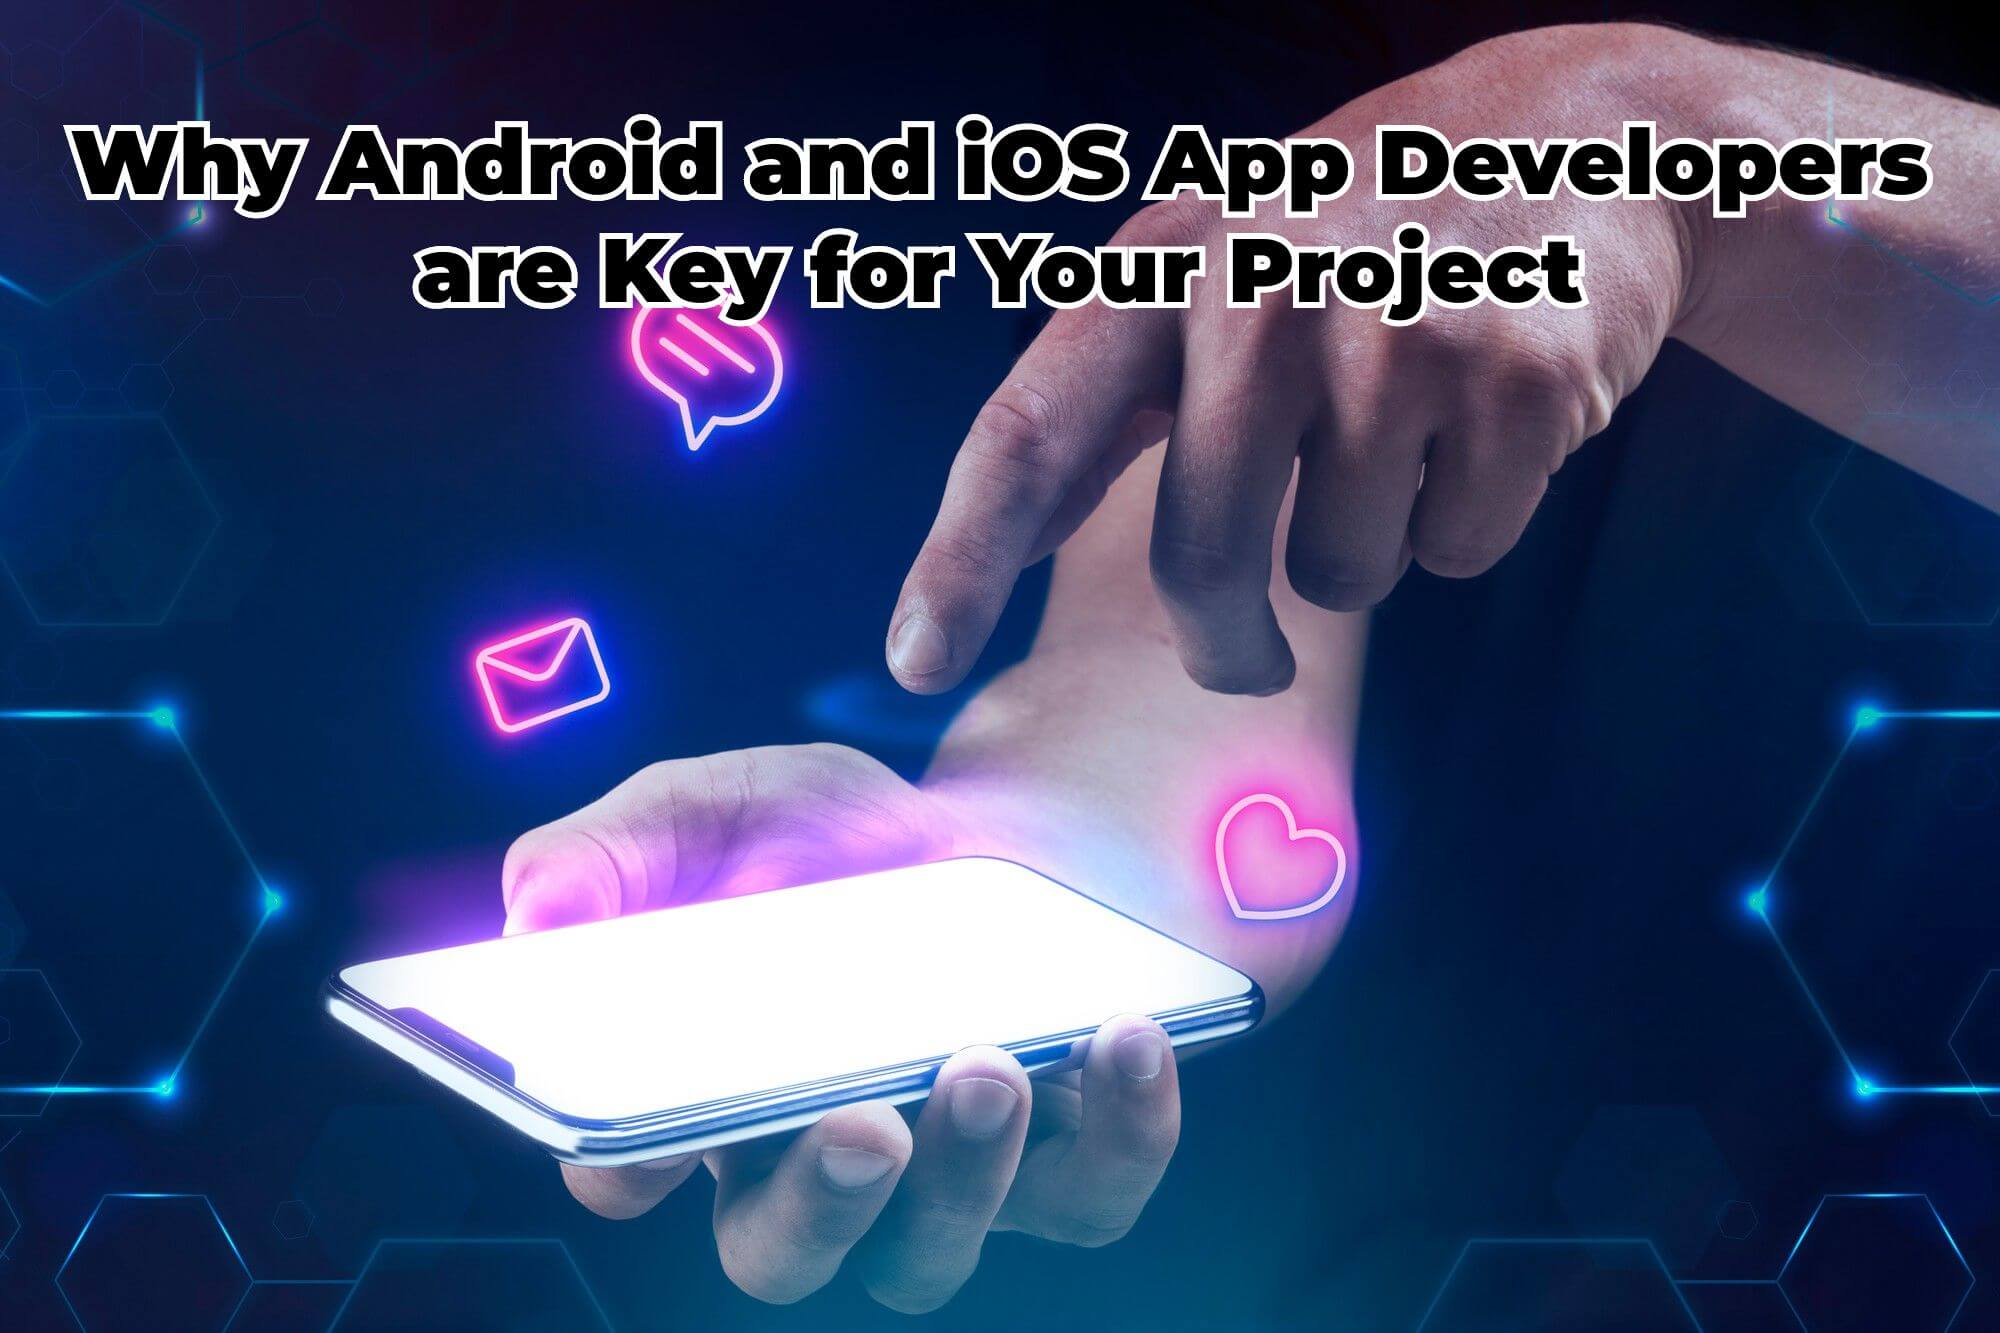 Android and iOS App Developers